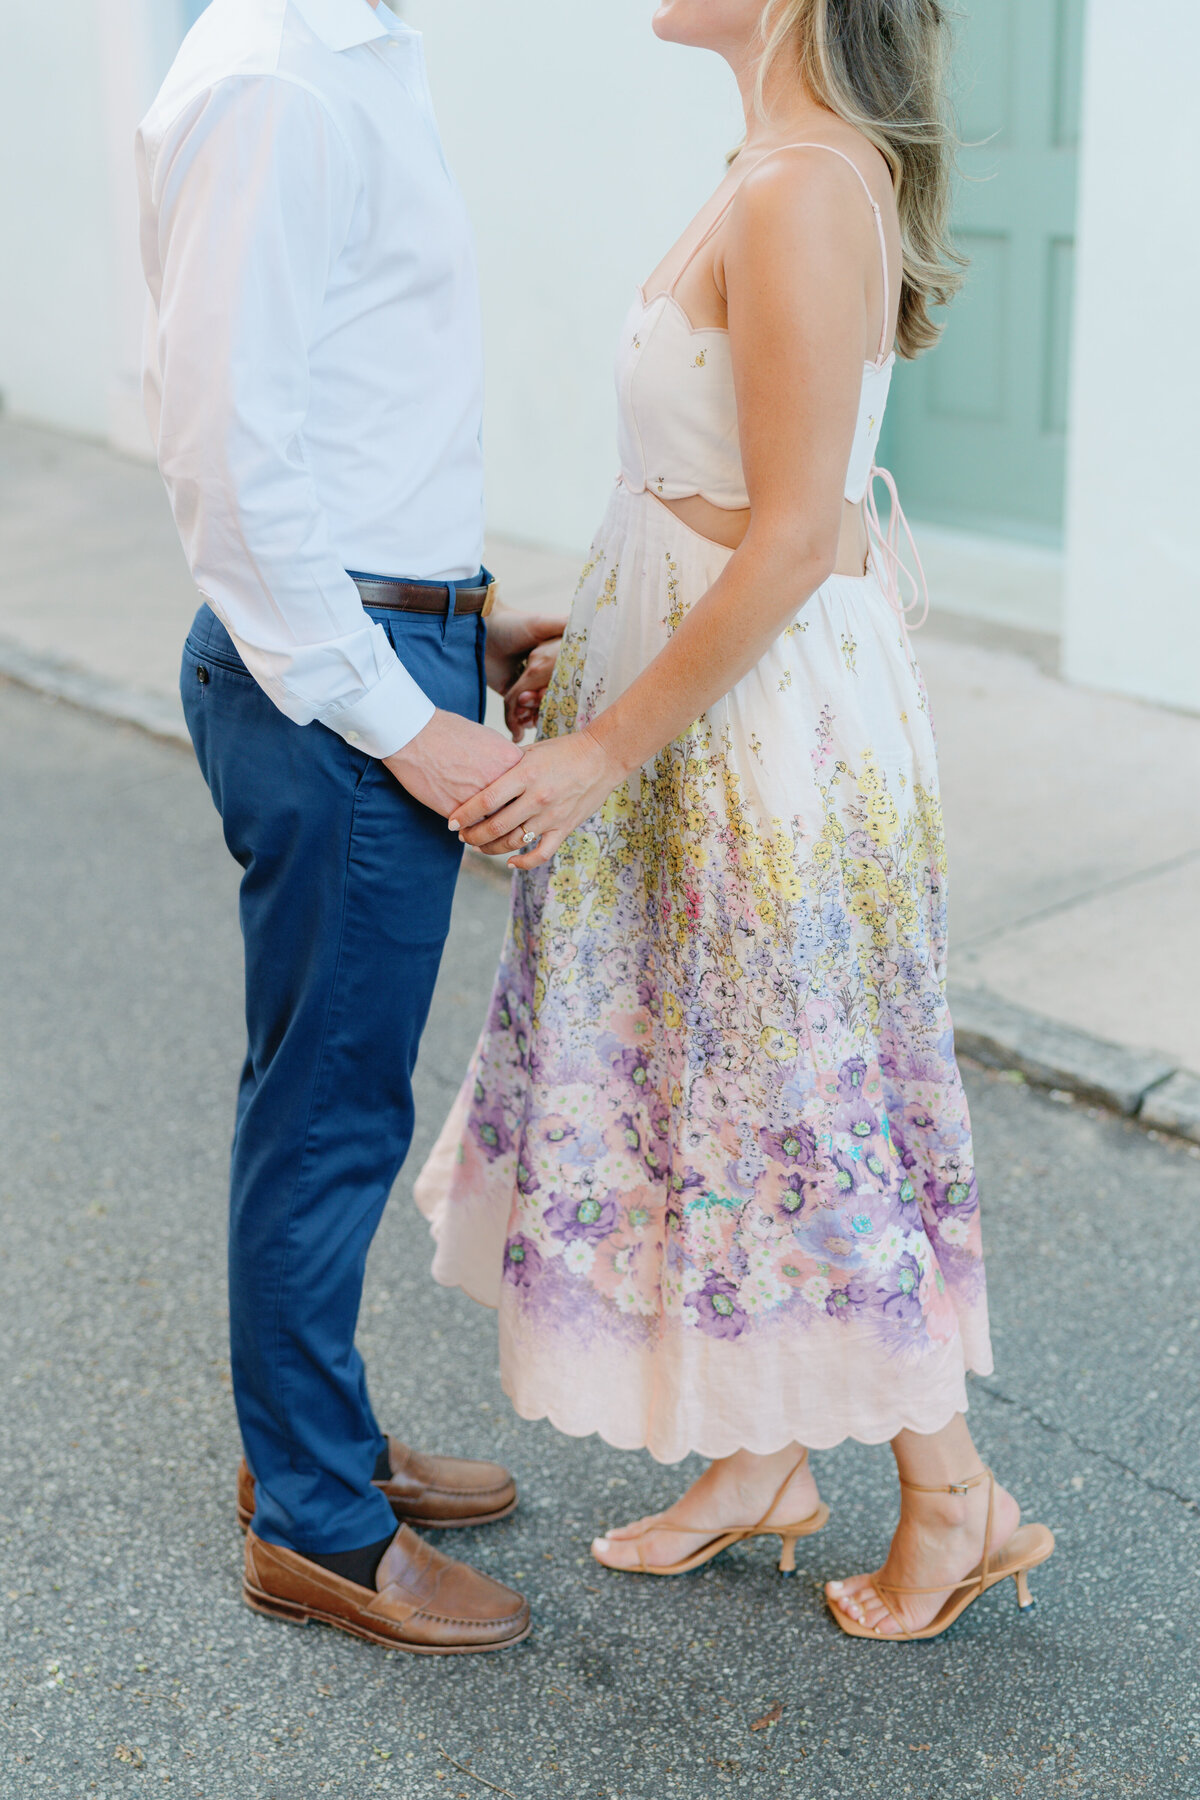 colorful_rainbow_row_downtown_charleston_purple_floral_dress_details_engagement_kailee_dimeglio_photography-63